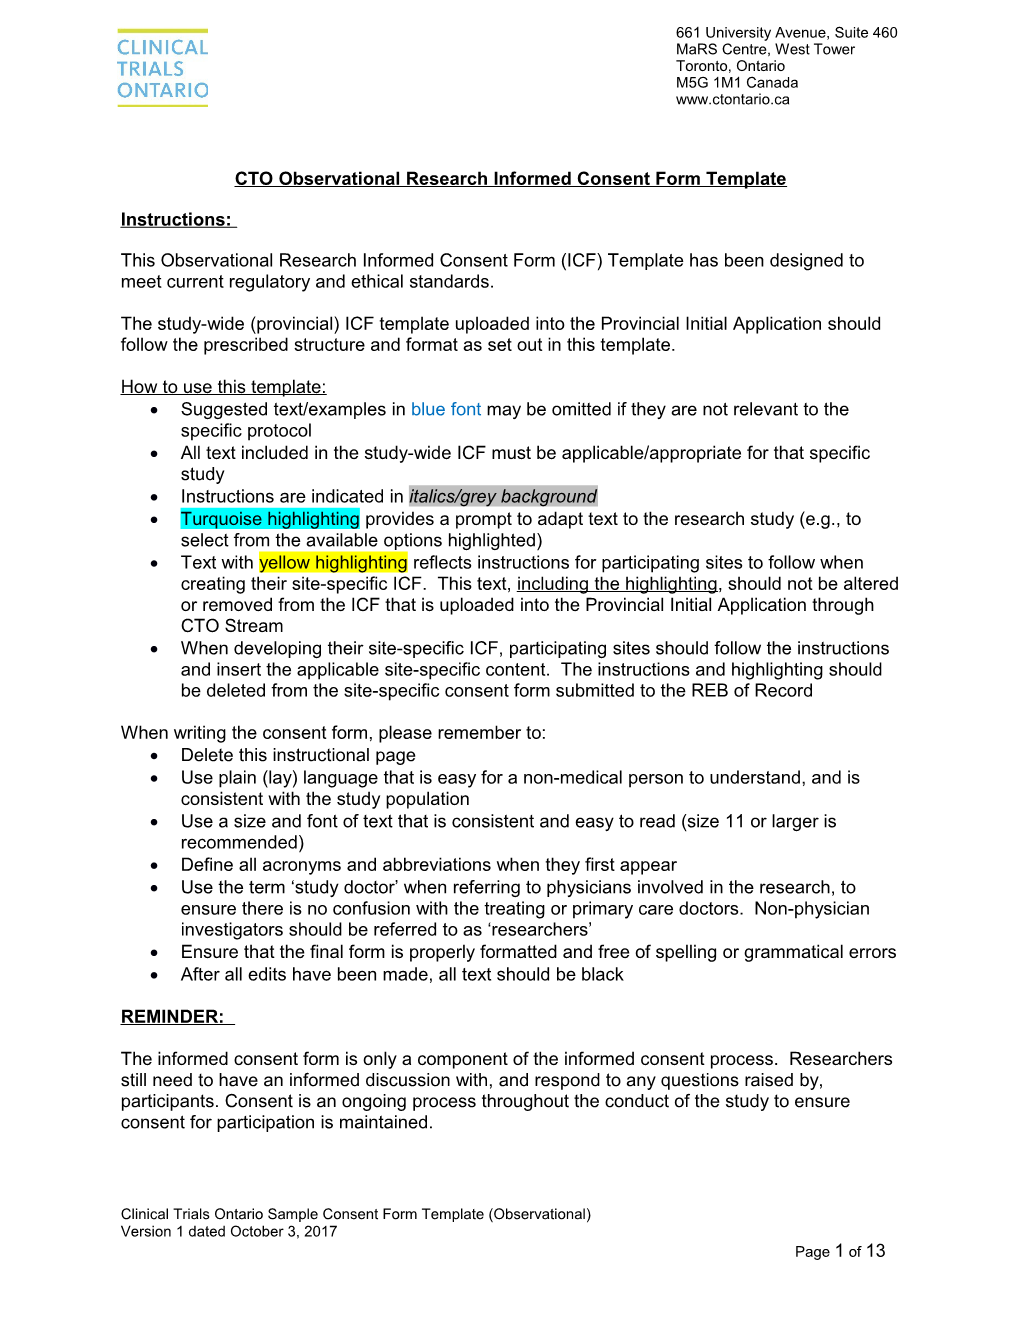 CTO Observational Research Informed Consent Form Template